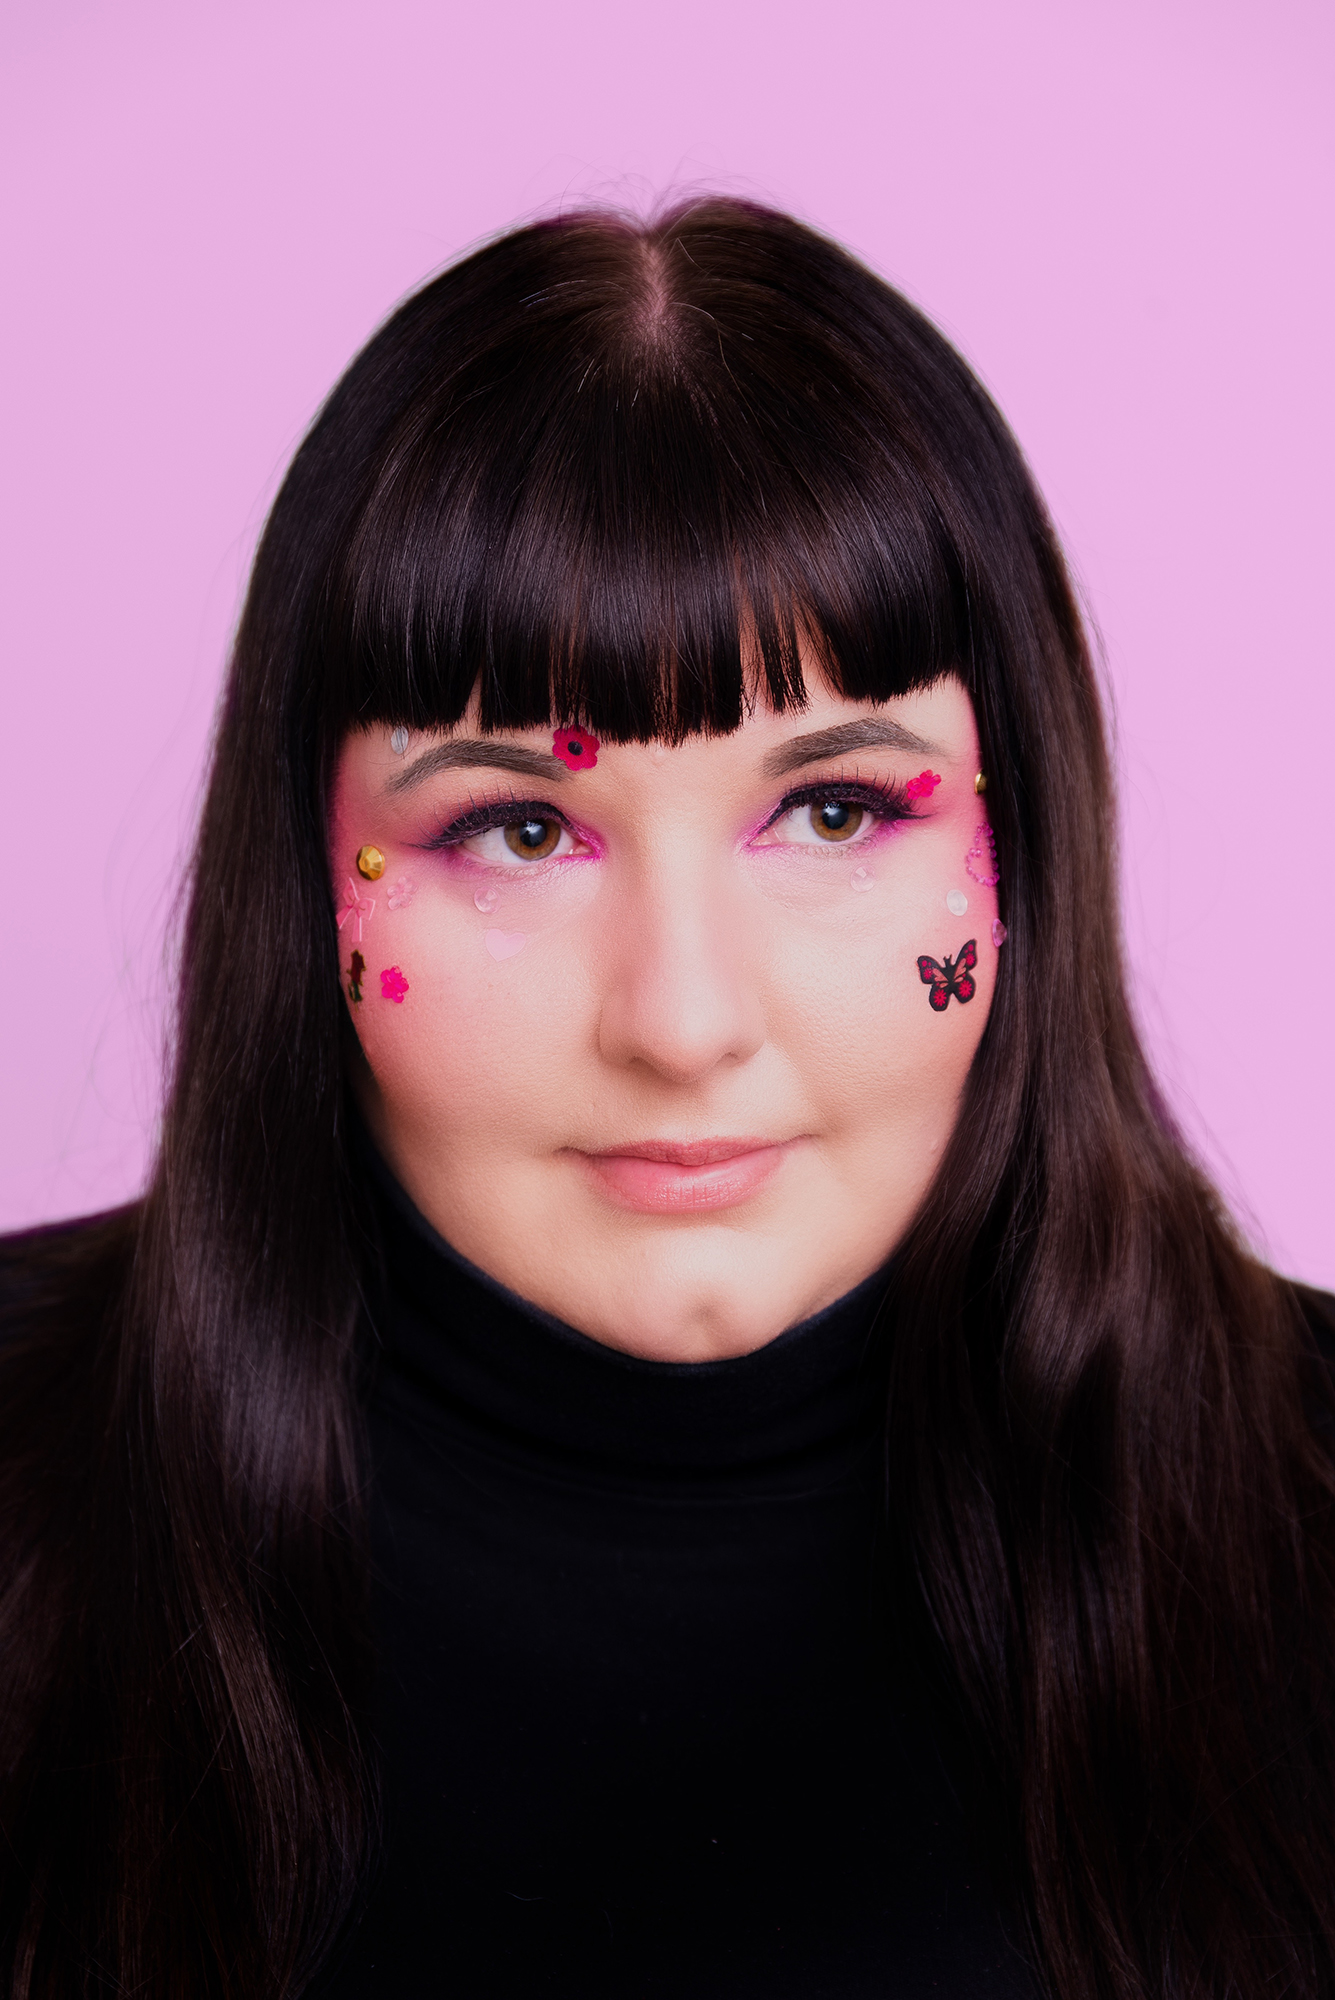 Photograph of a person with shoulder length black hair and black shirt, photographed against a pink background with stickers of butterflies, flowers and gems on their face